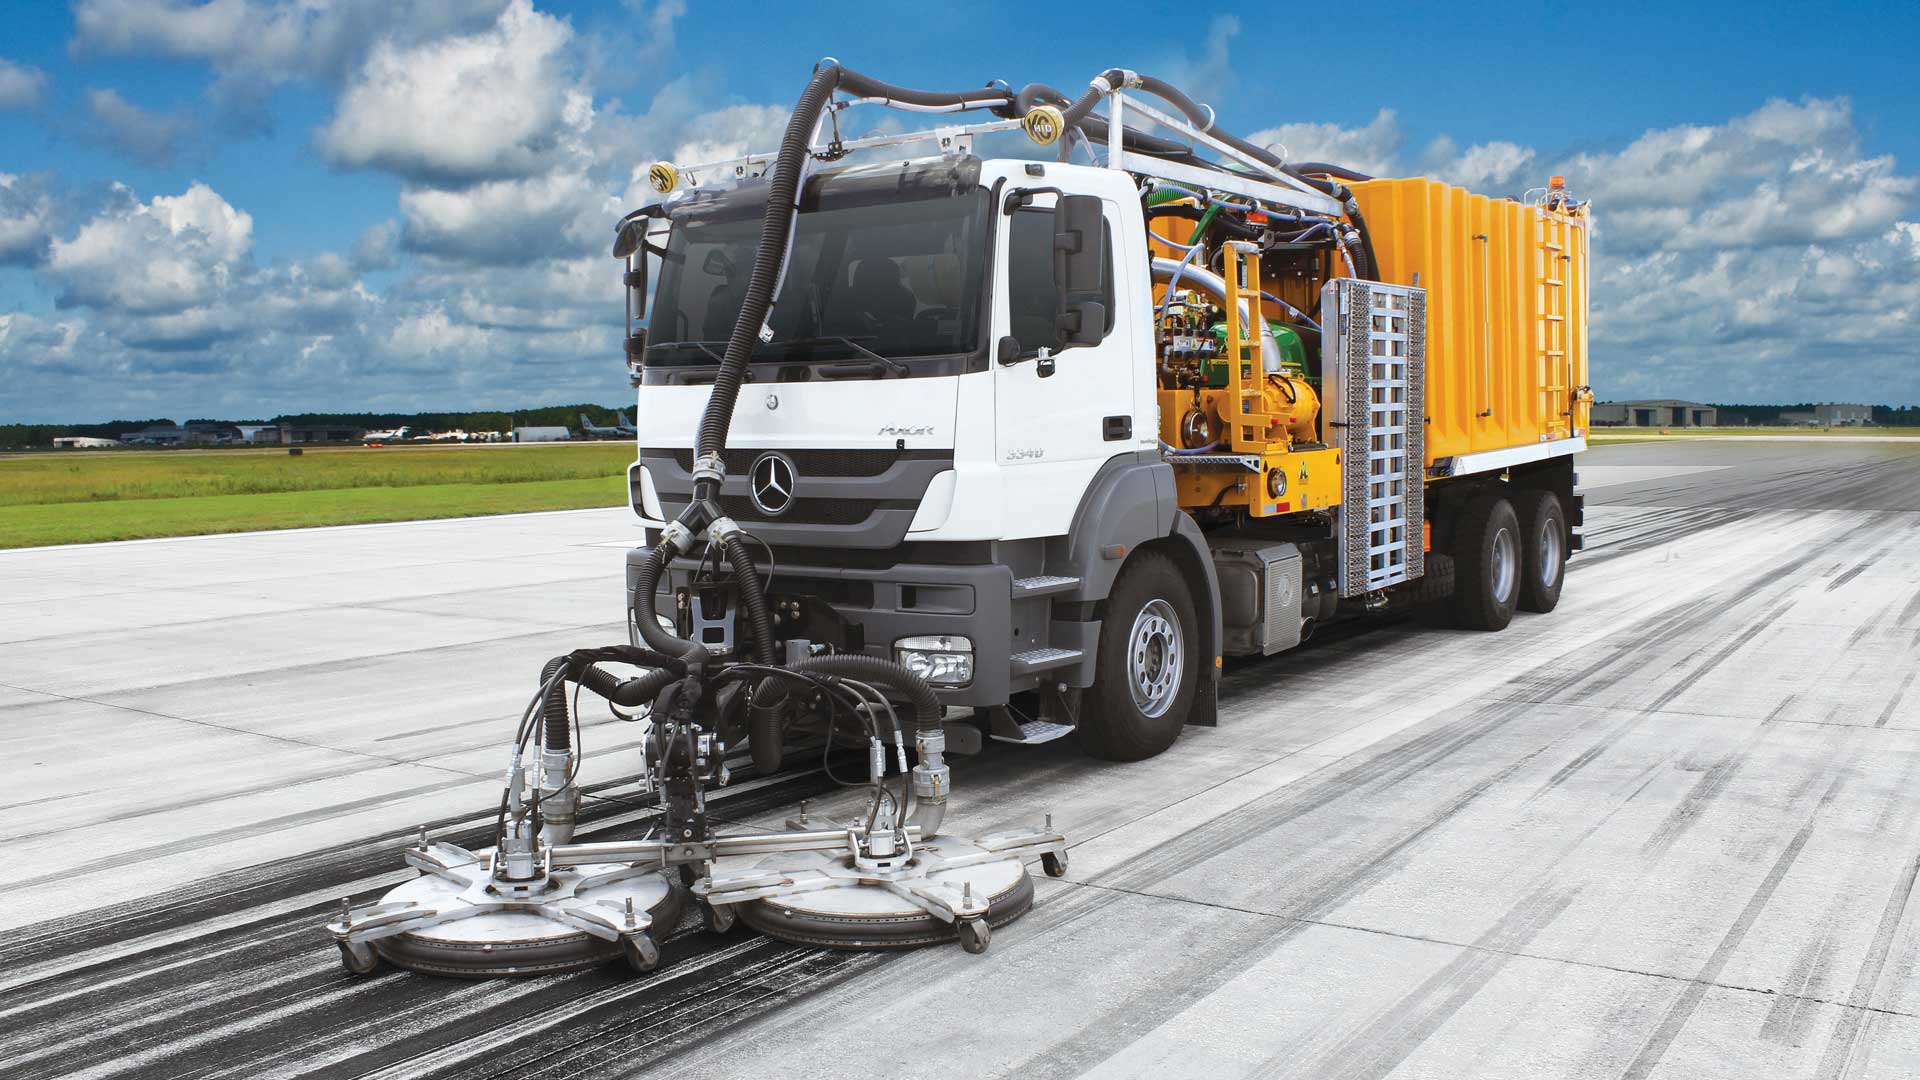 40,000 psi Solutions for Roadway Marking Removal and Runway Rubber Removal